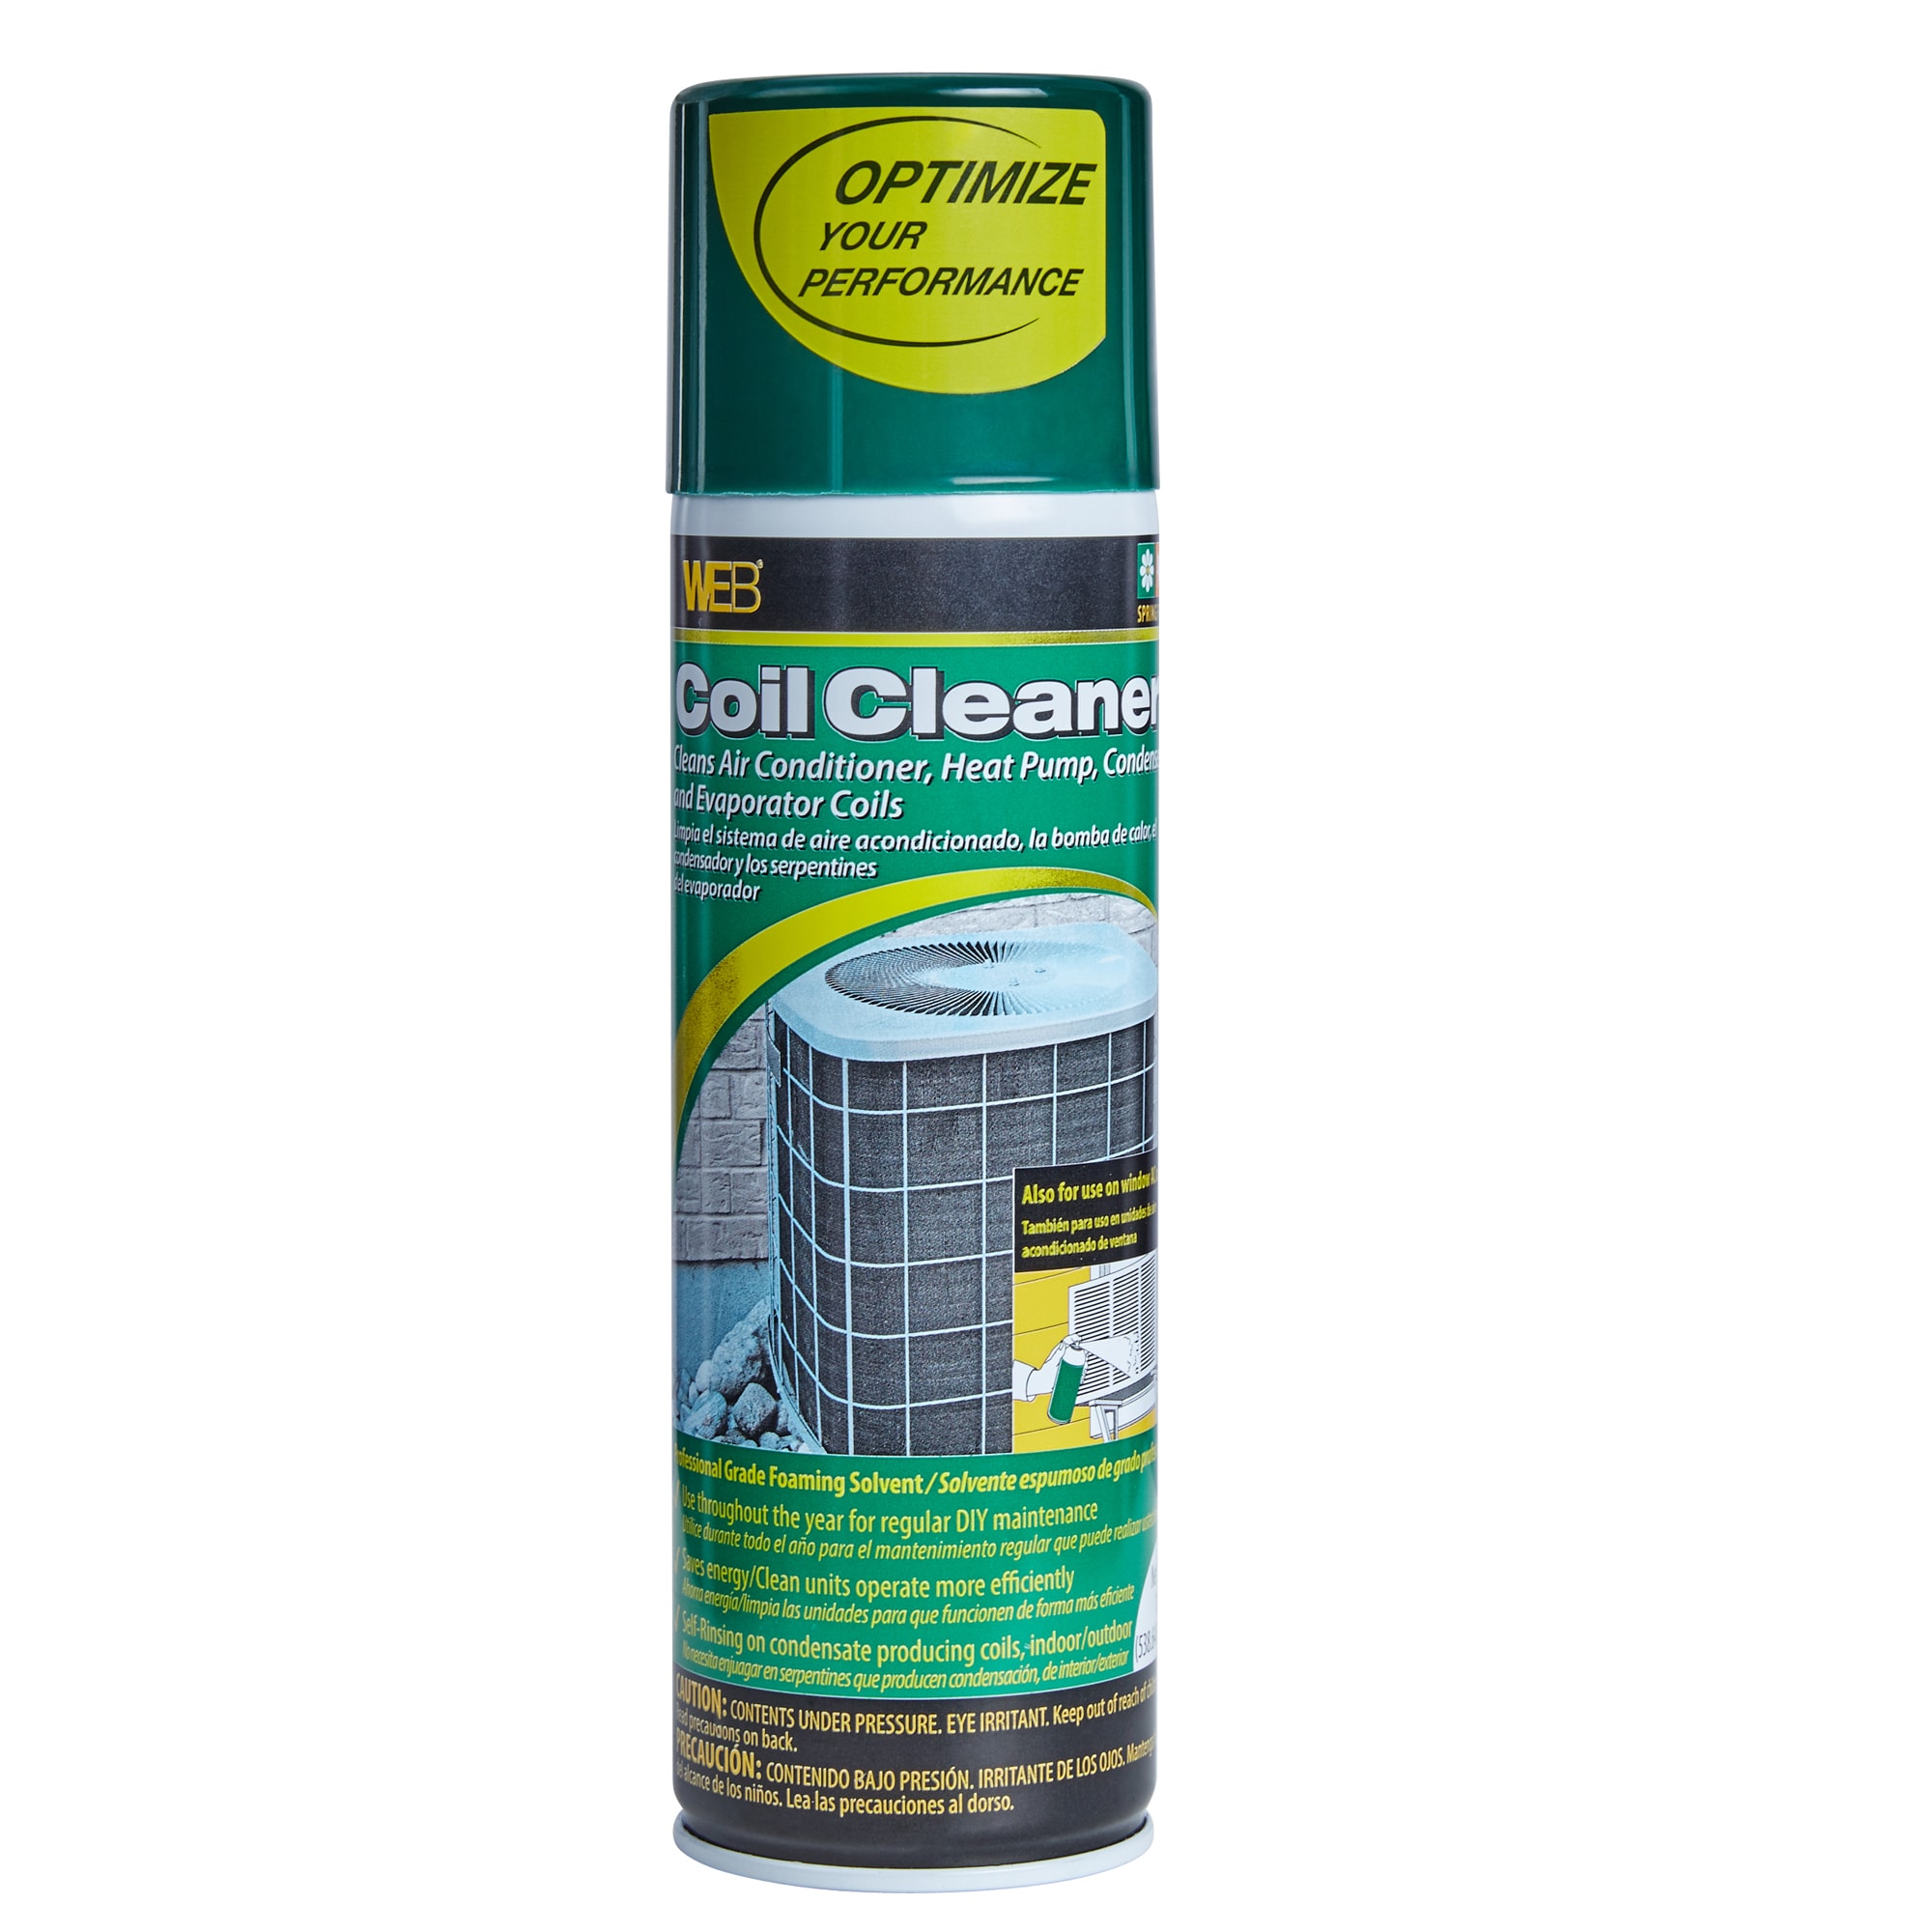 Details about   6-Pack Foam Cleaners Disinfectant for HVAC Refrigeration Evaporator Condenser